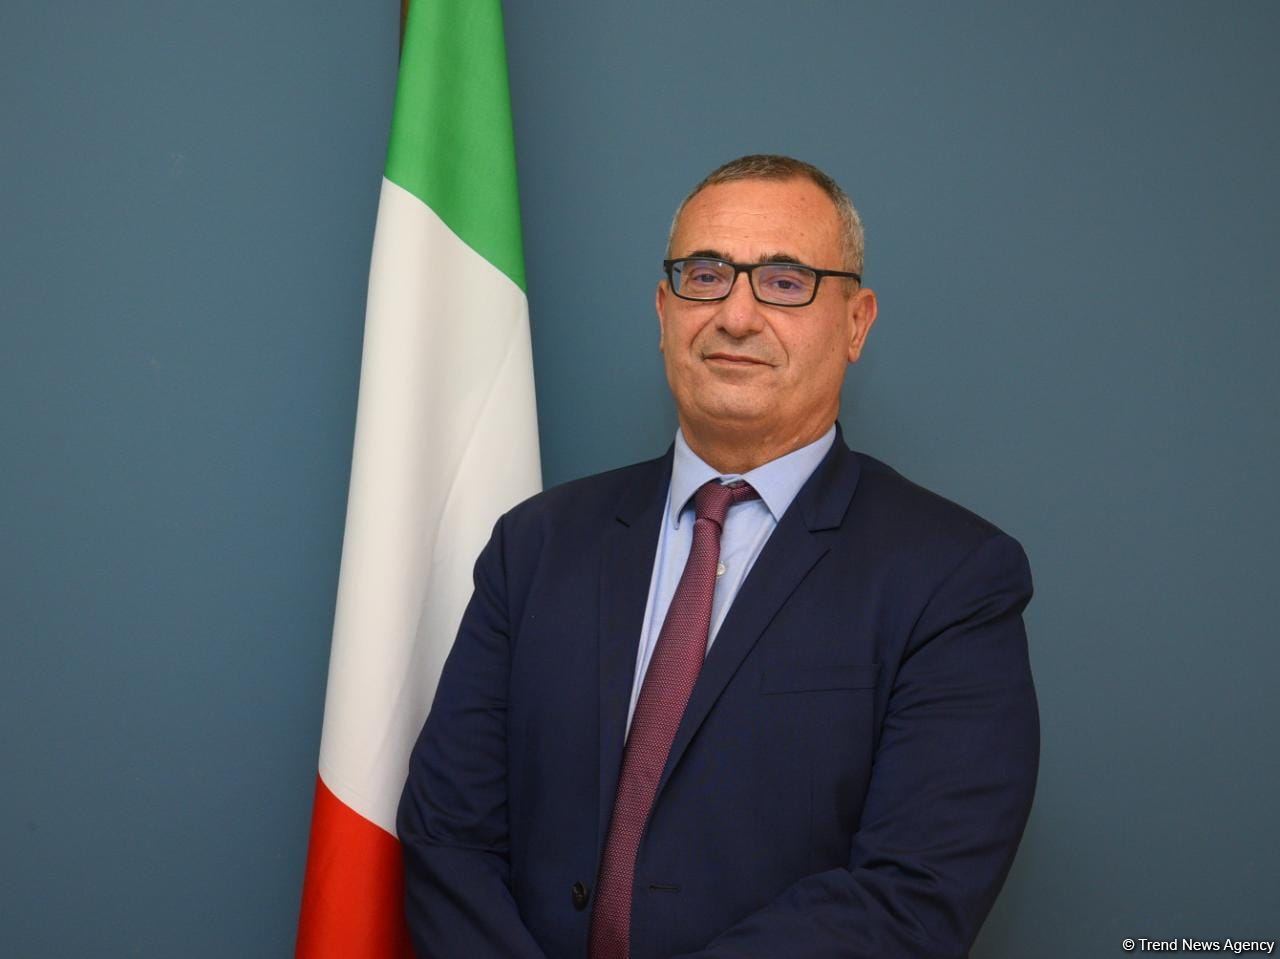 ITA organizes business meetings, promotions to connect Azerbaijani importers with Italian producers - ITA Director